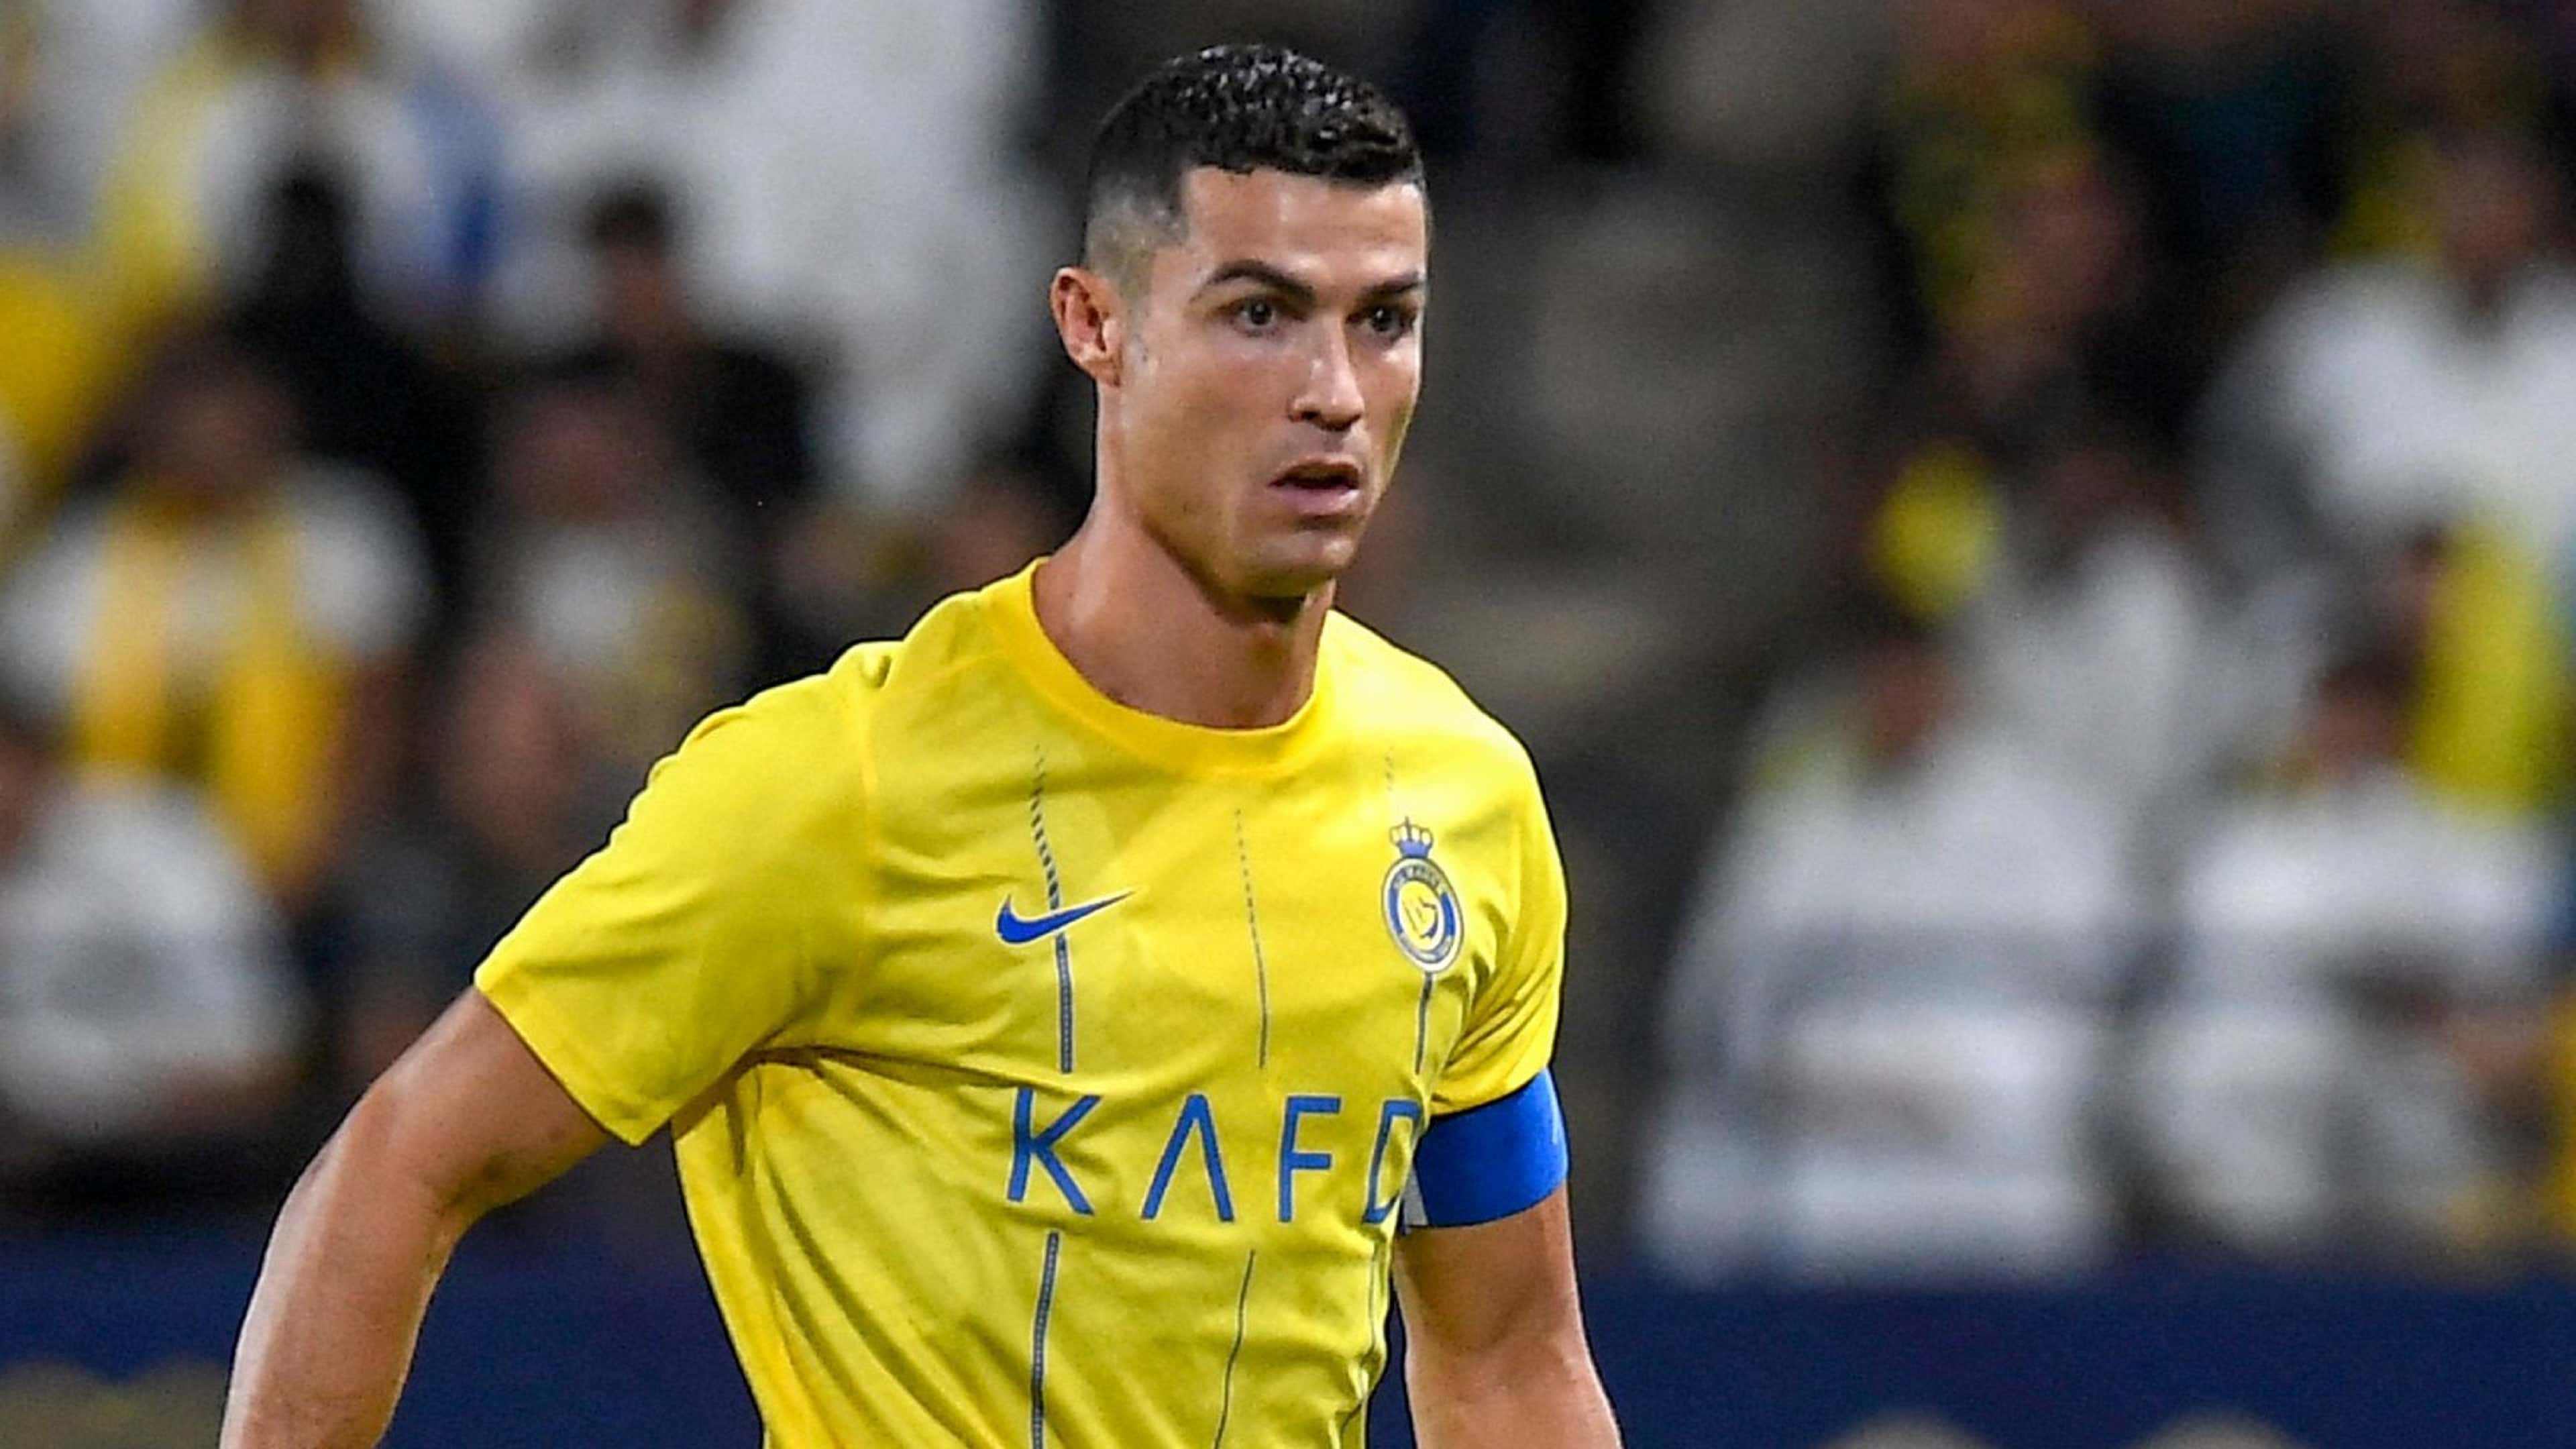 WATCH: The stars align! Cristiano Ronaldo's glorious flick sets up Sadio Mane goal before Portugal star heads in a second for Al-Nassr | Goal.com